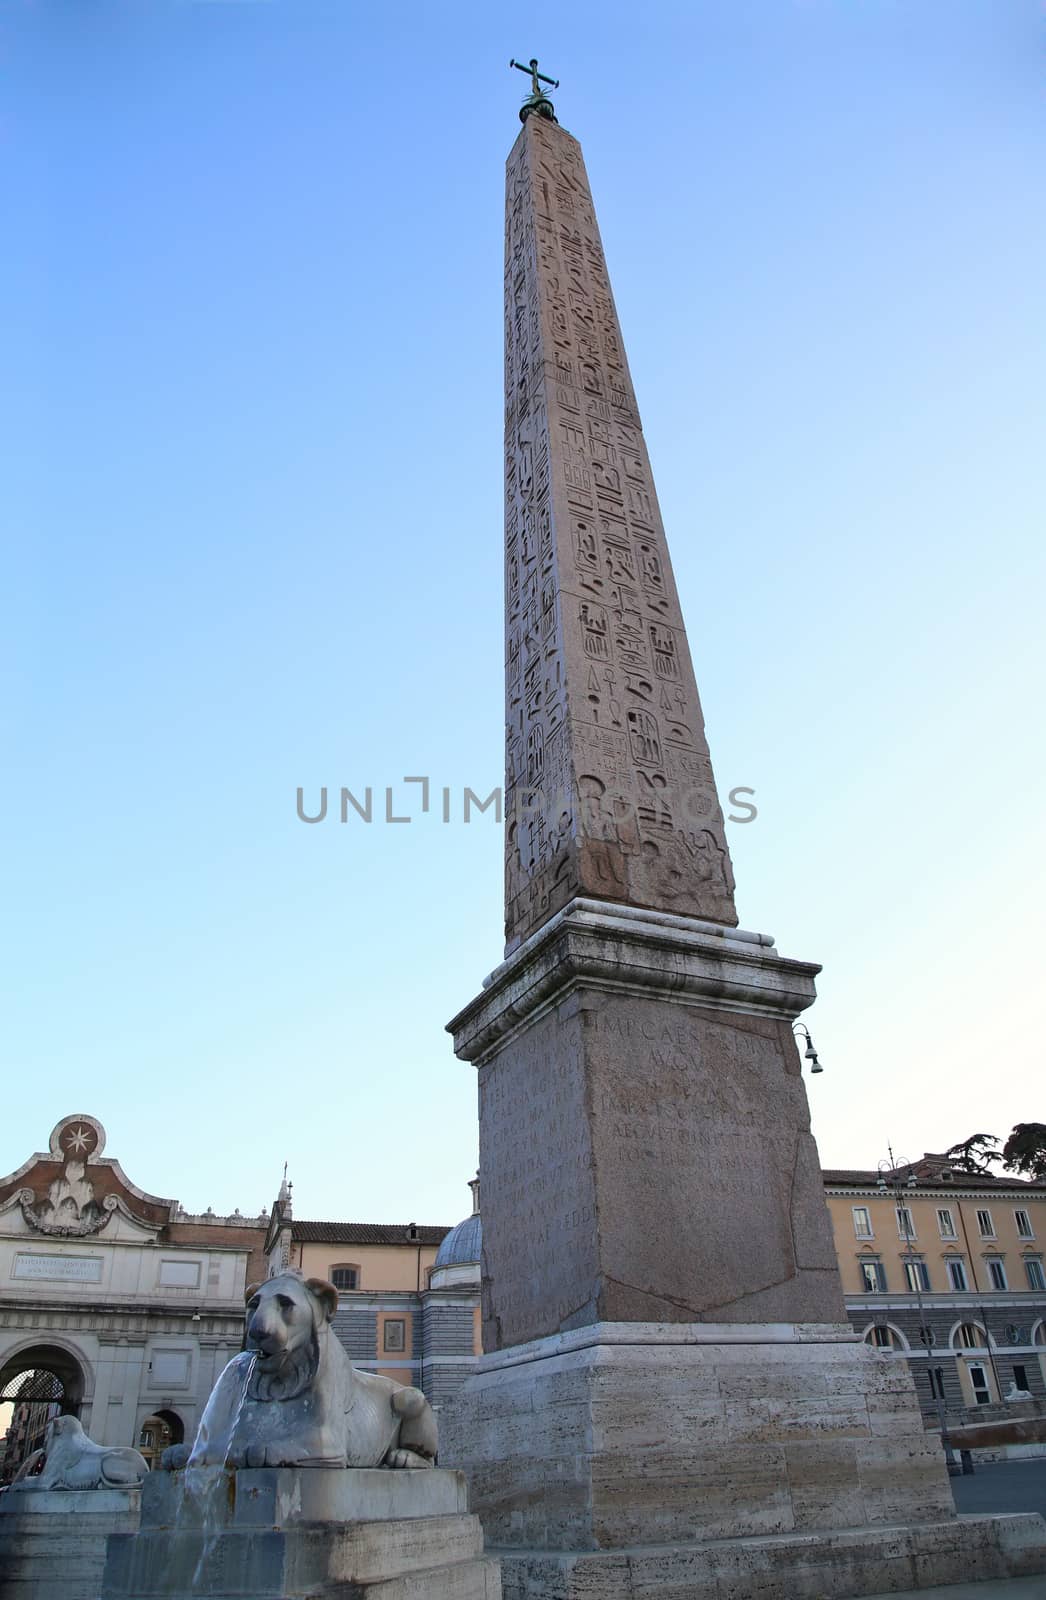 Piazza del Popolo and Flaminio Obelisk in Rome, Italy ( photographed very early in the morning )